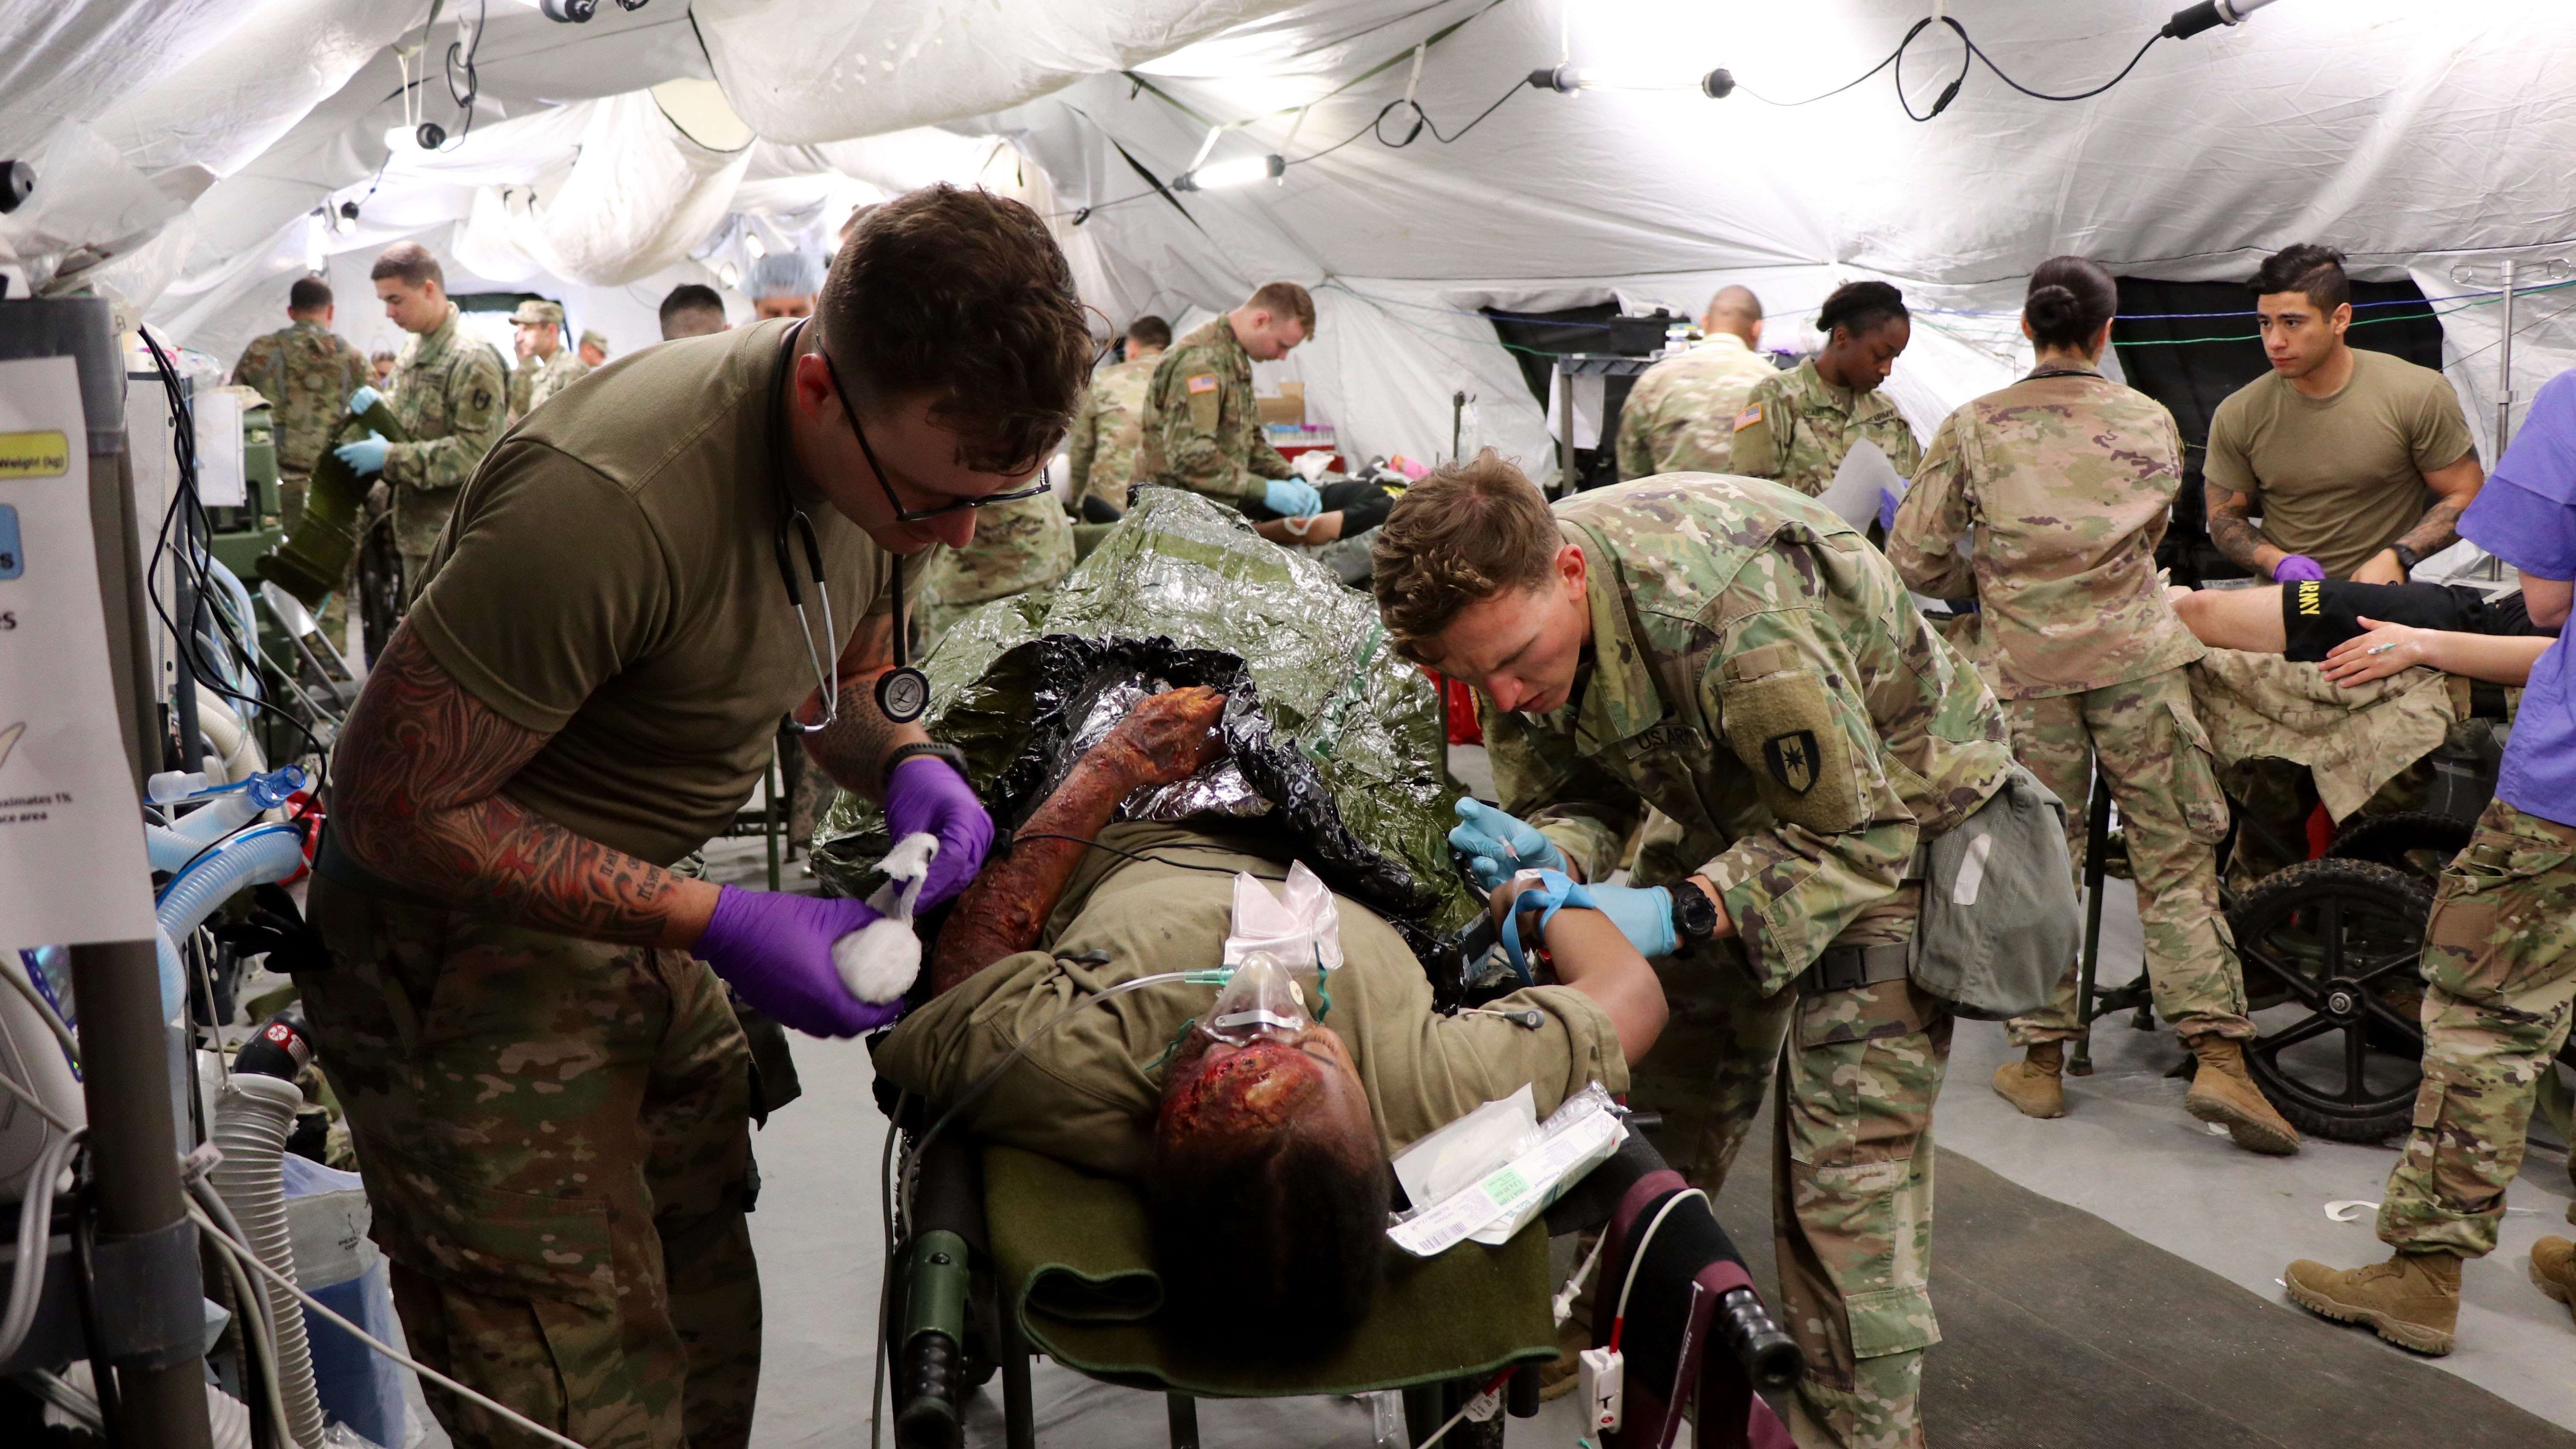 Military Medical Tent photo